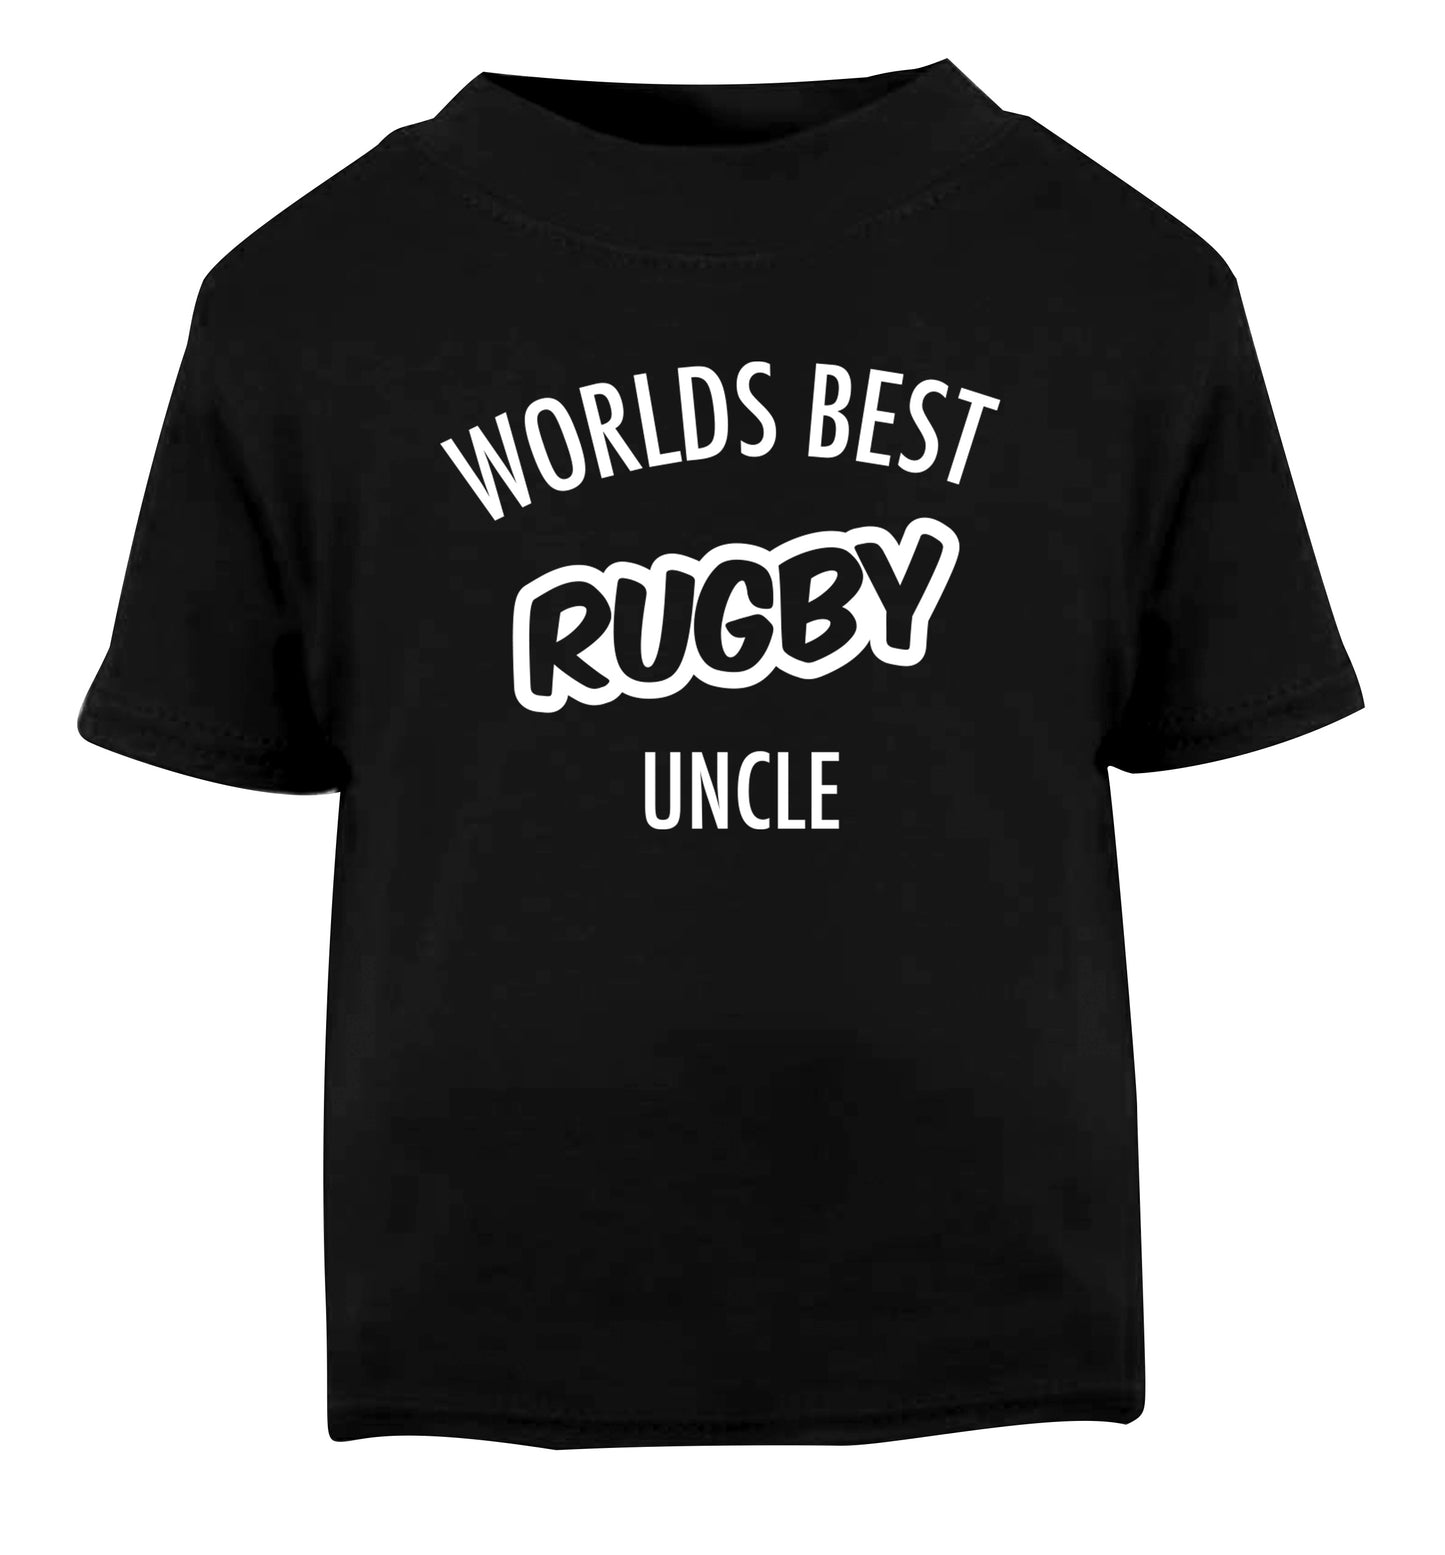 Worlds best rugby uncle Black Baby Toddler Tshirt 2 years